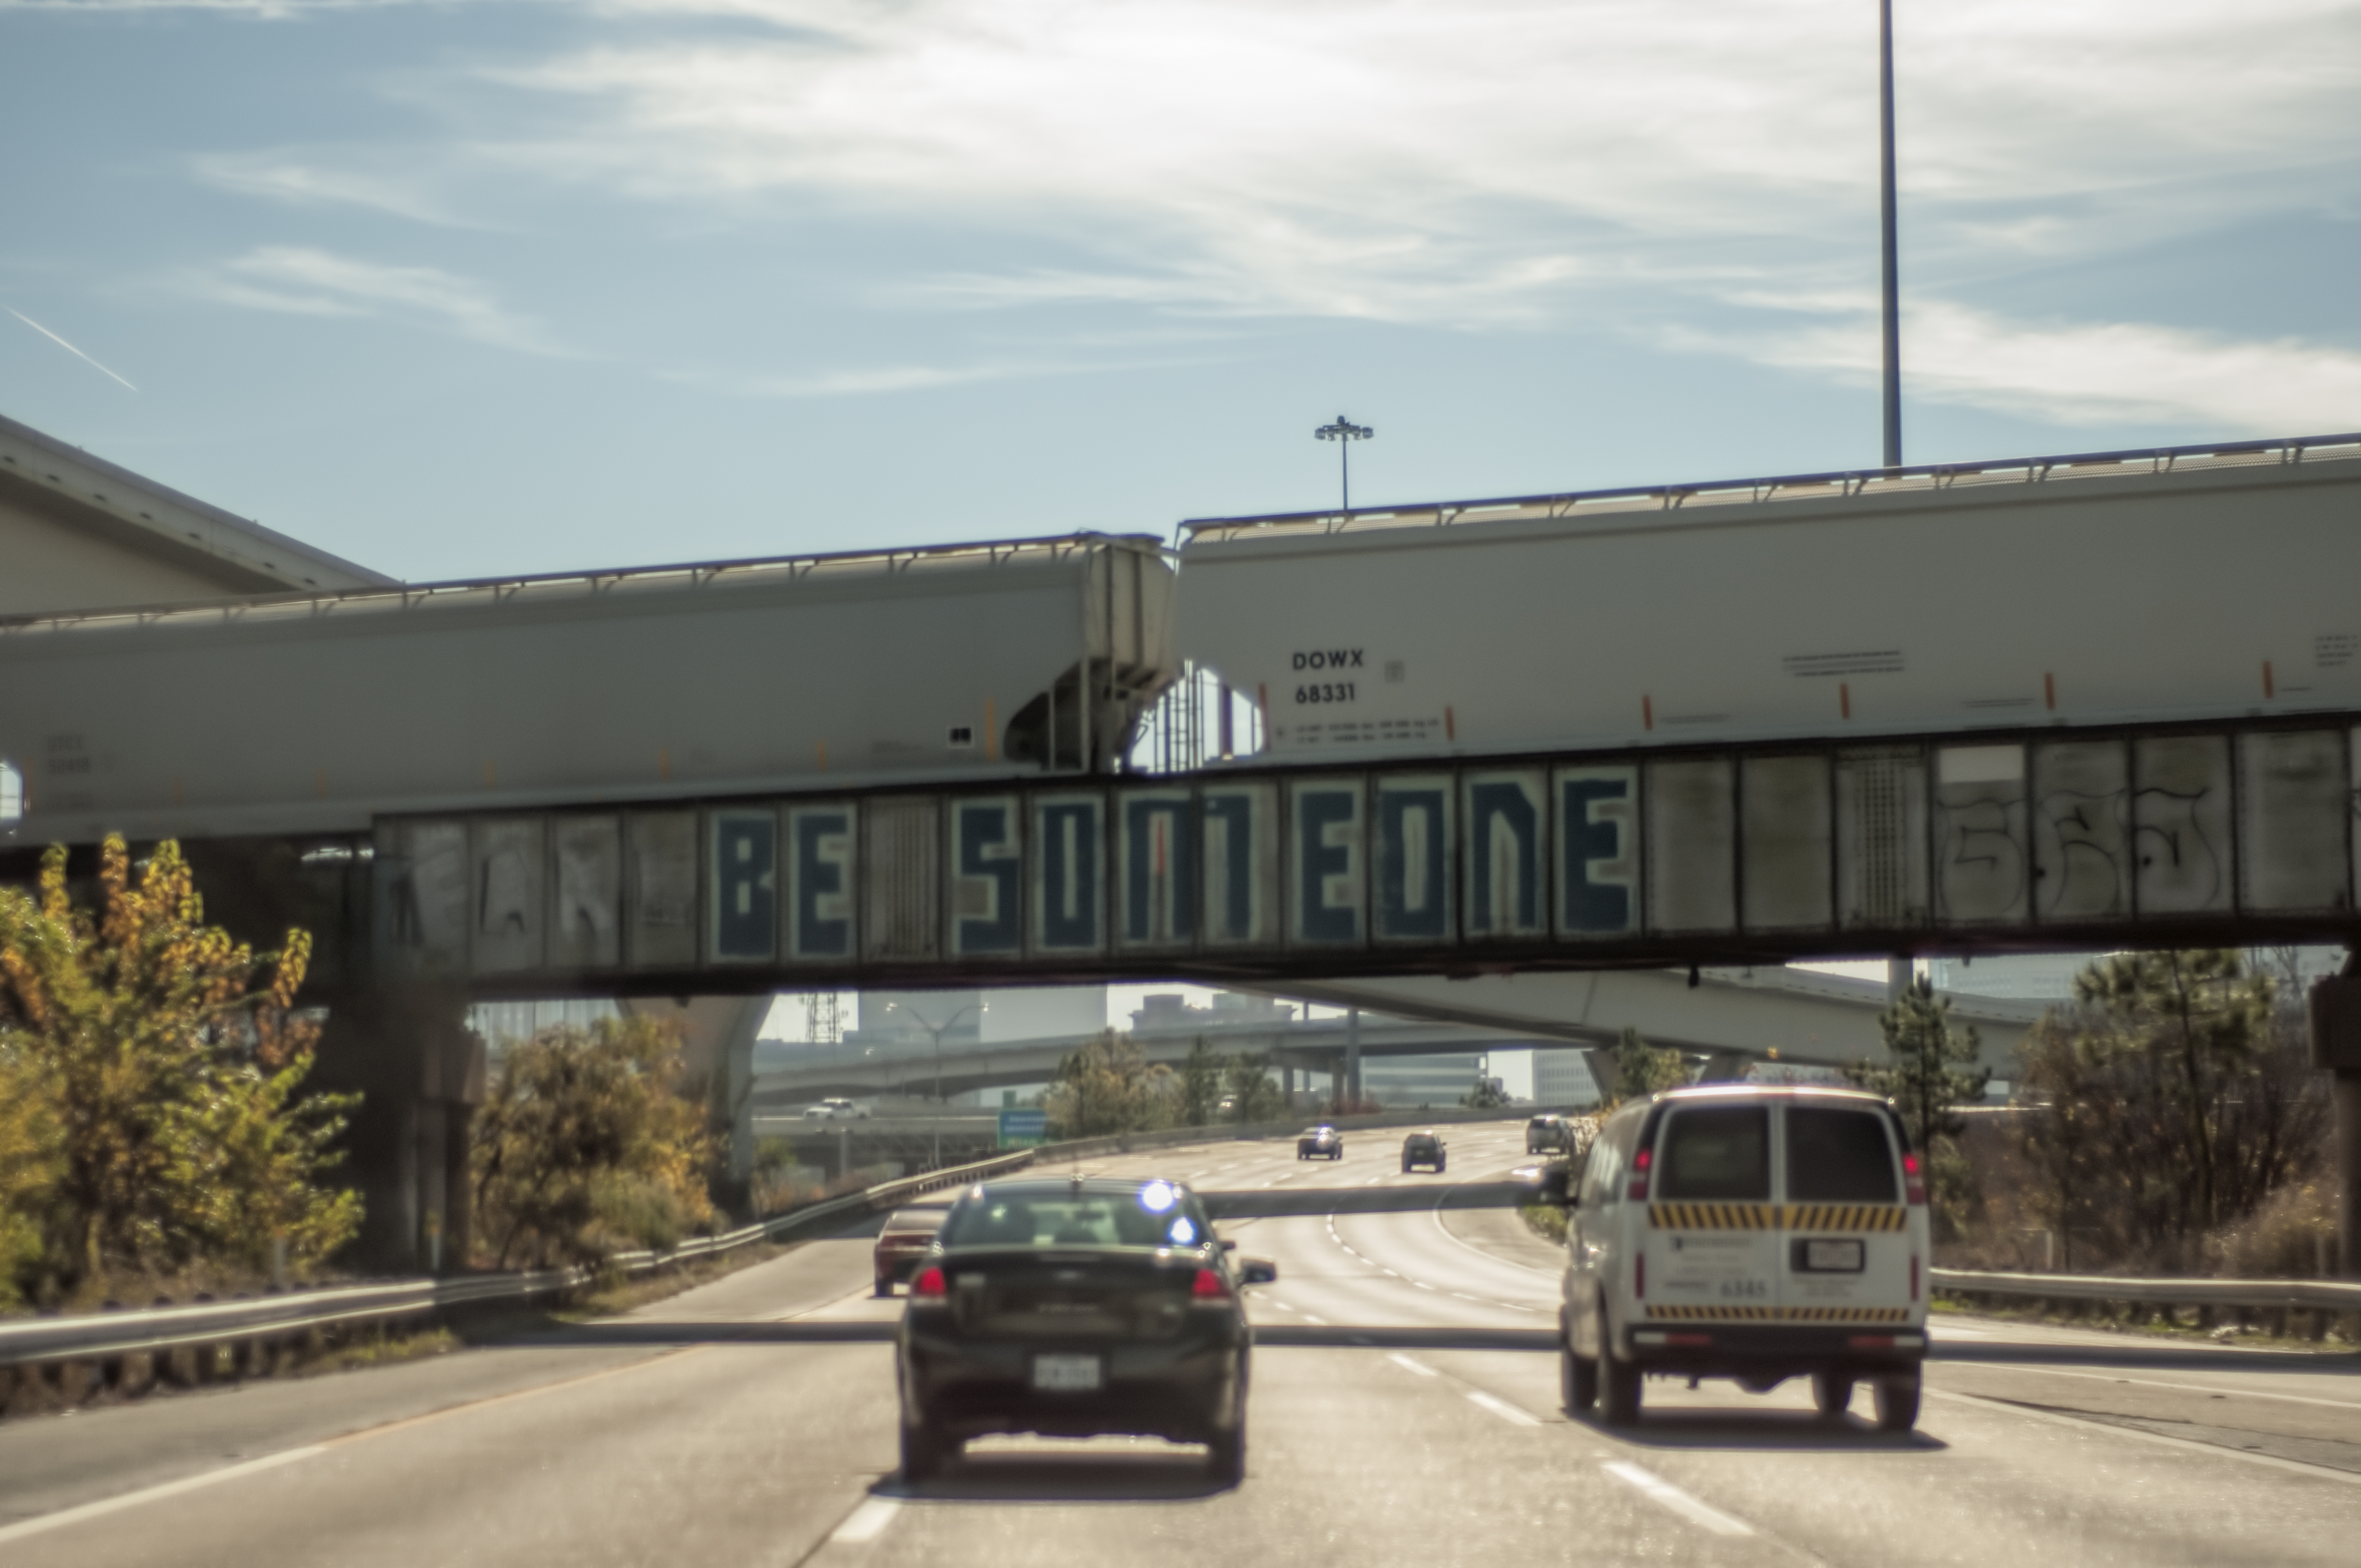 The bridge over I-45 with the "be someone" graffiti. Photo courtesy of Flickr user optictopic.